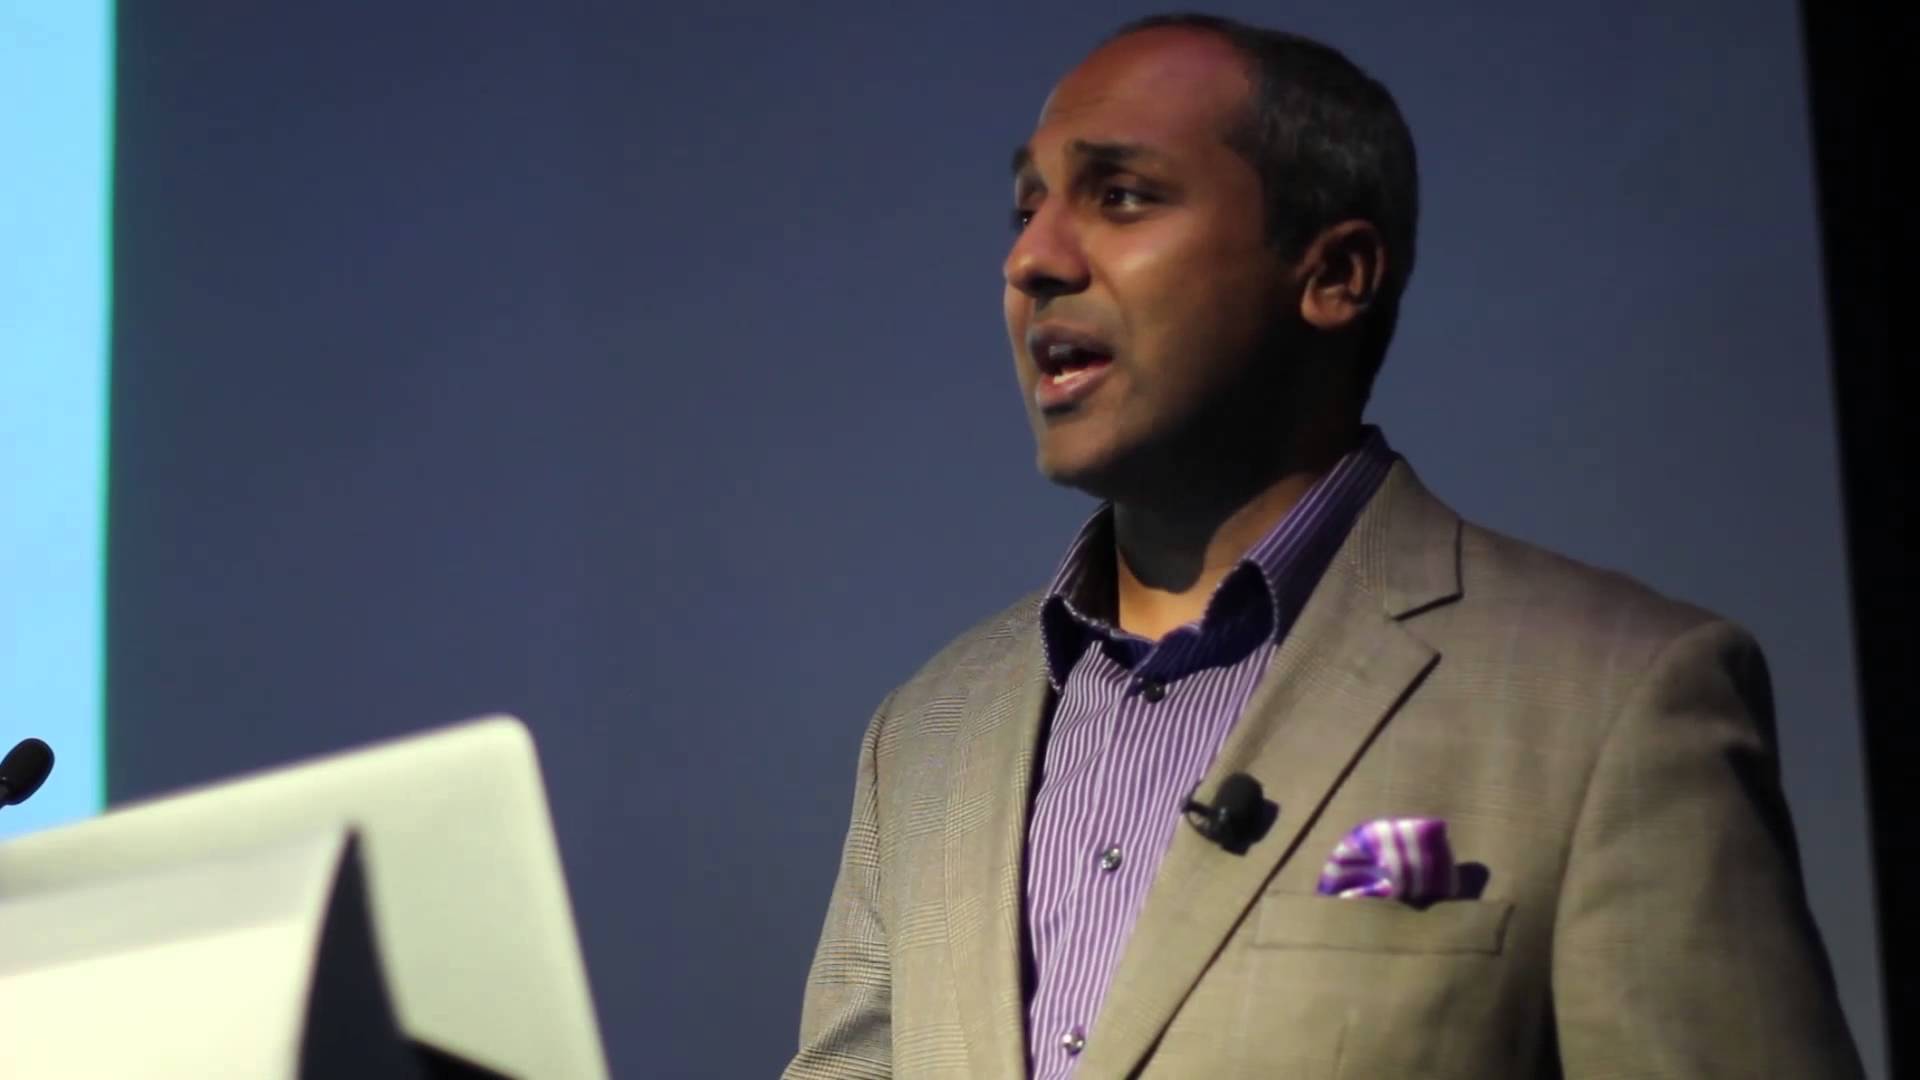 Sree Sreenivasan ‘Exhilarated and Grateful’ to be named NYC’s Chief Digital Officer